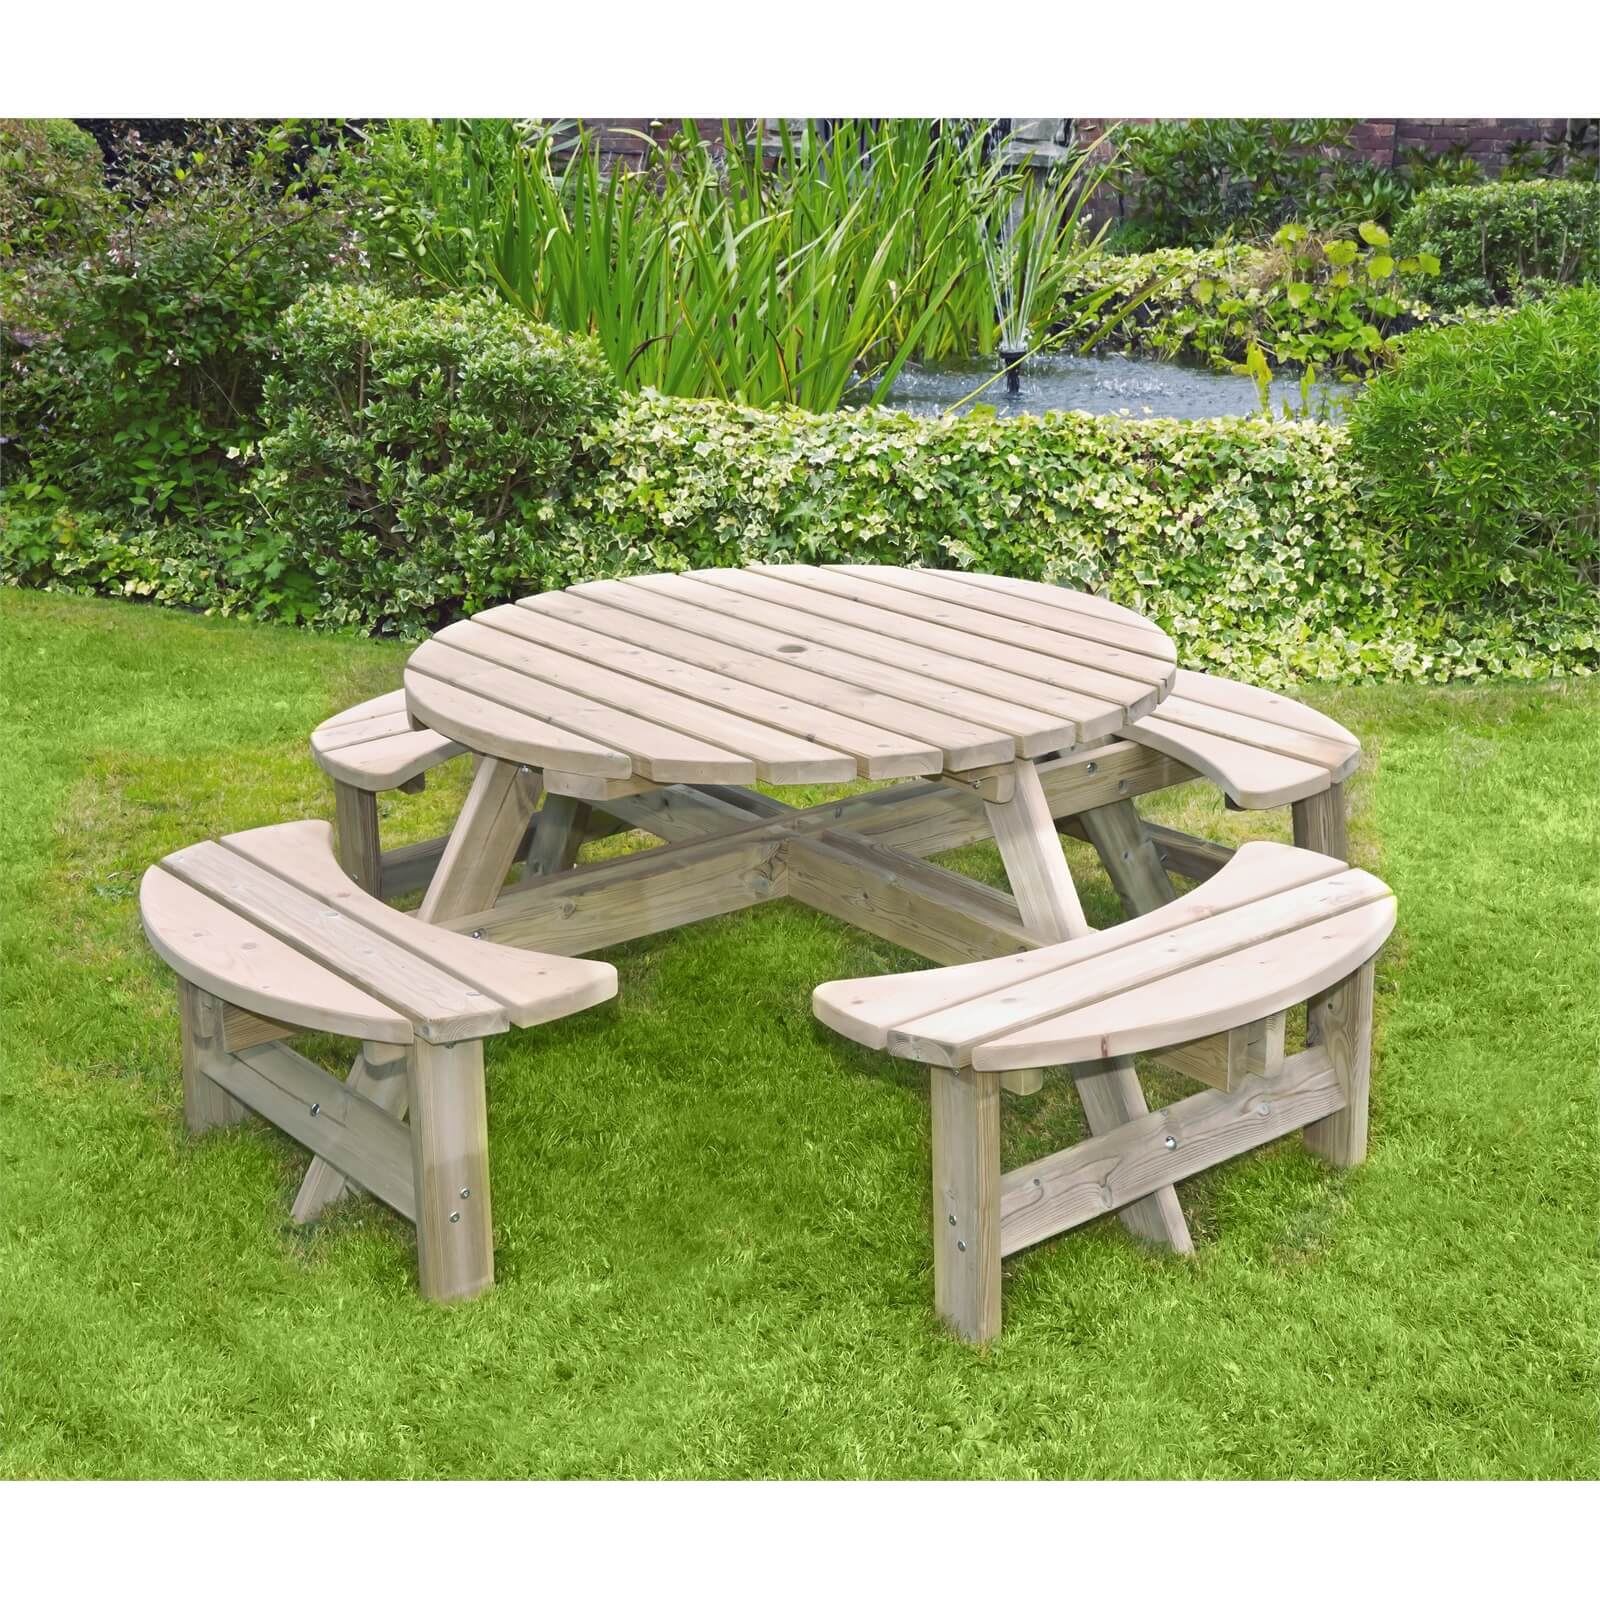 Photo of Anchor Fast Fsc Milldale Round Picnic Bench